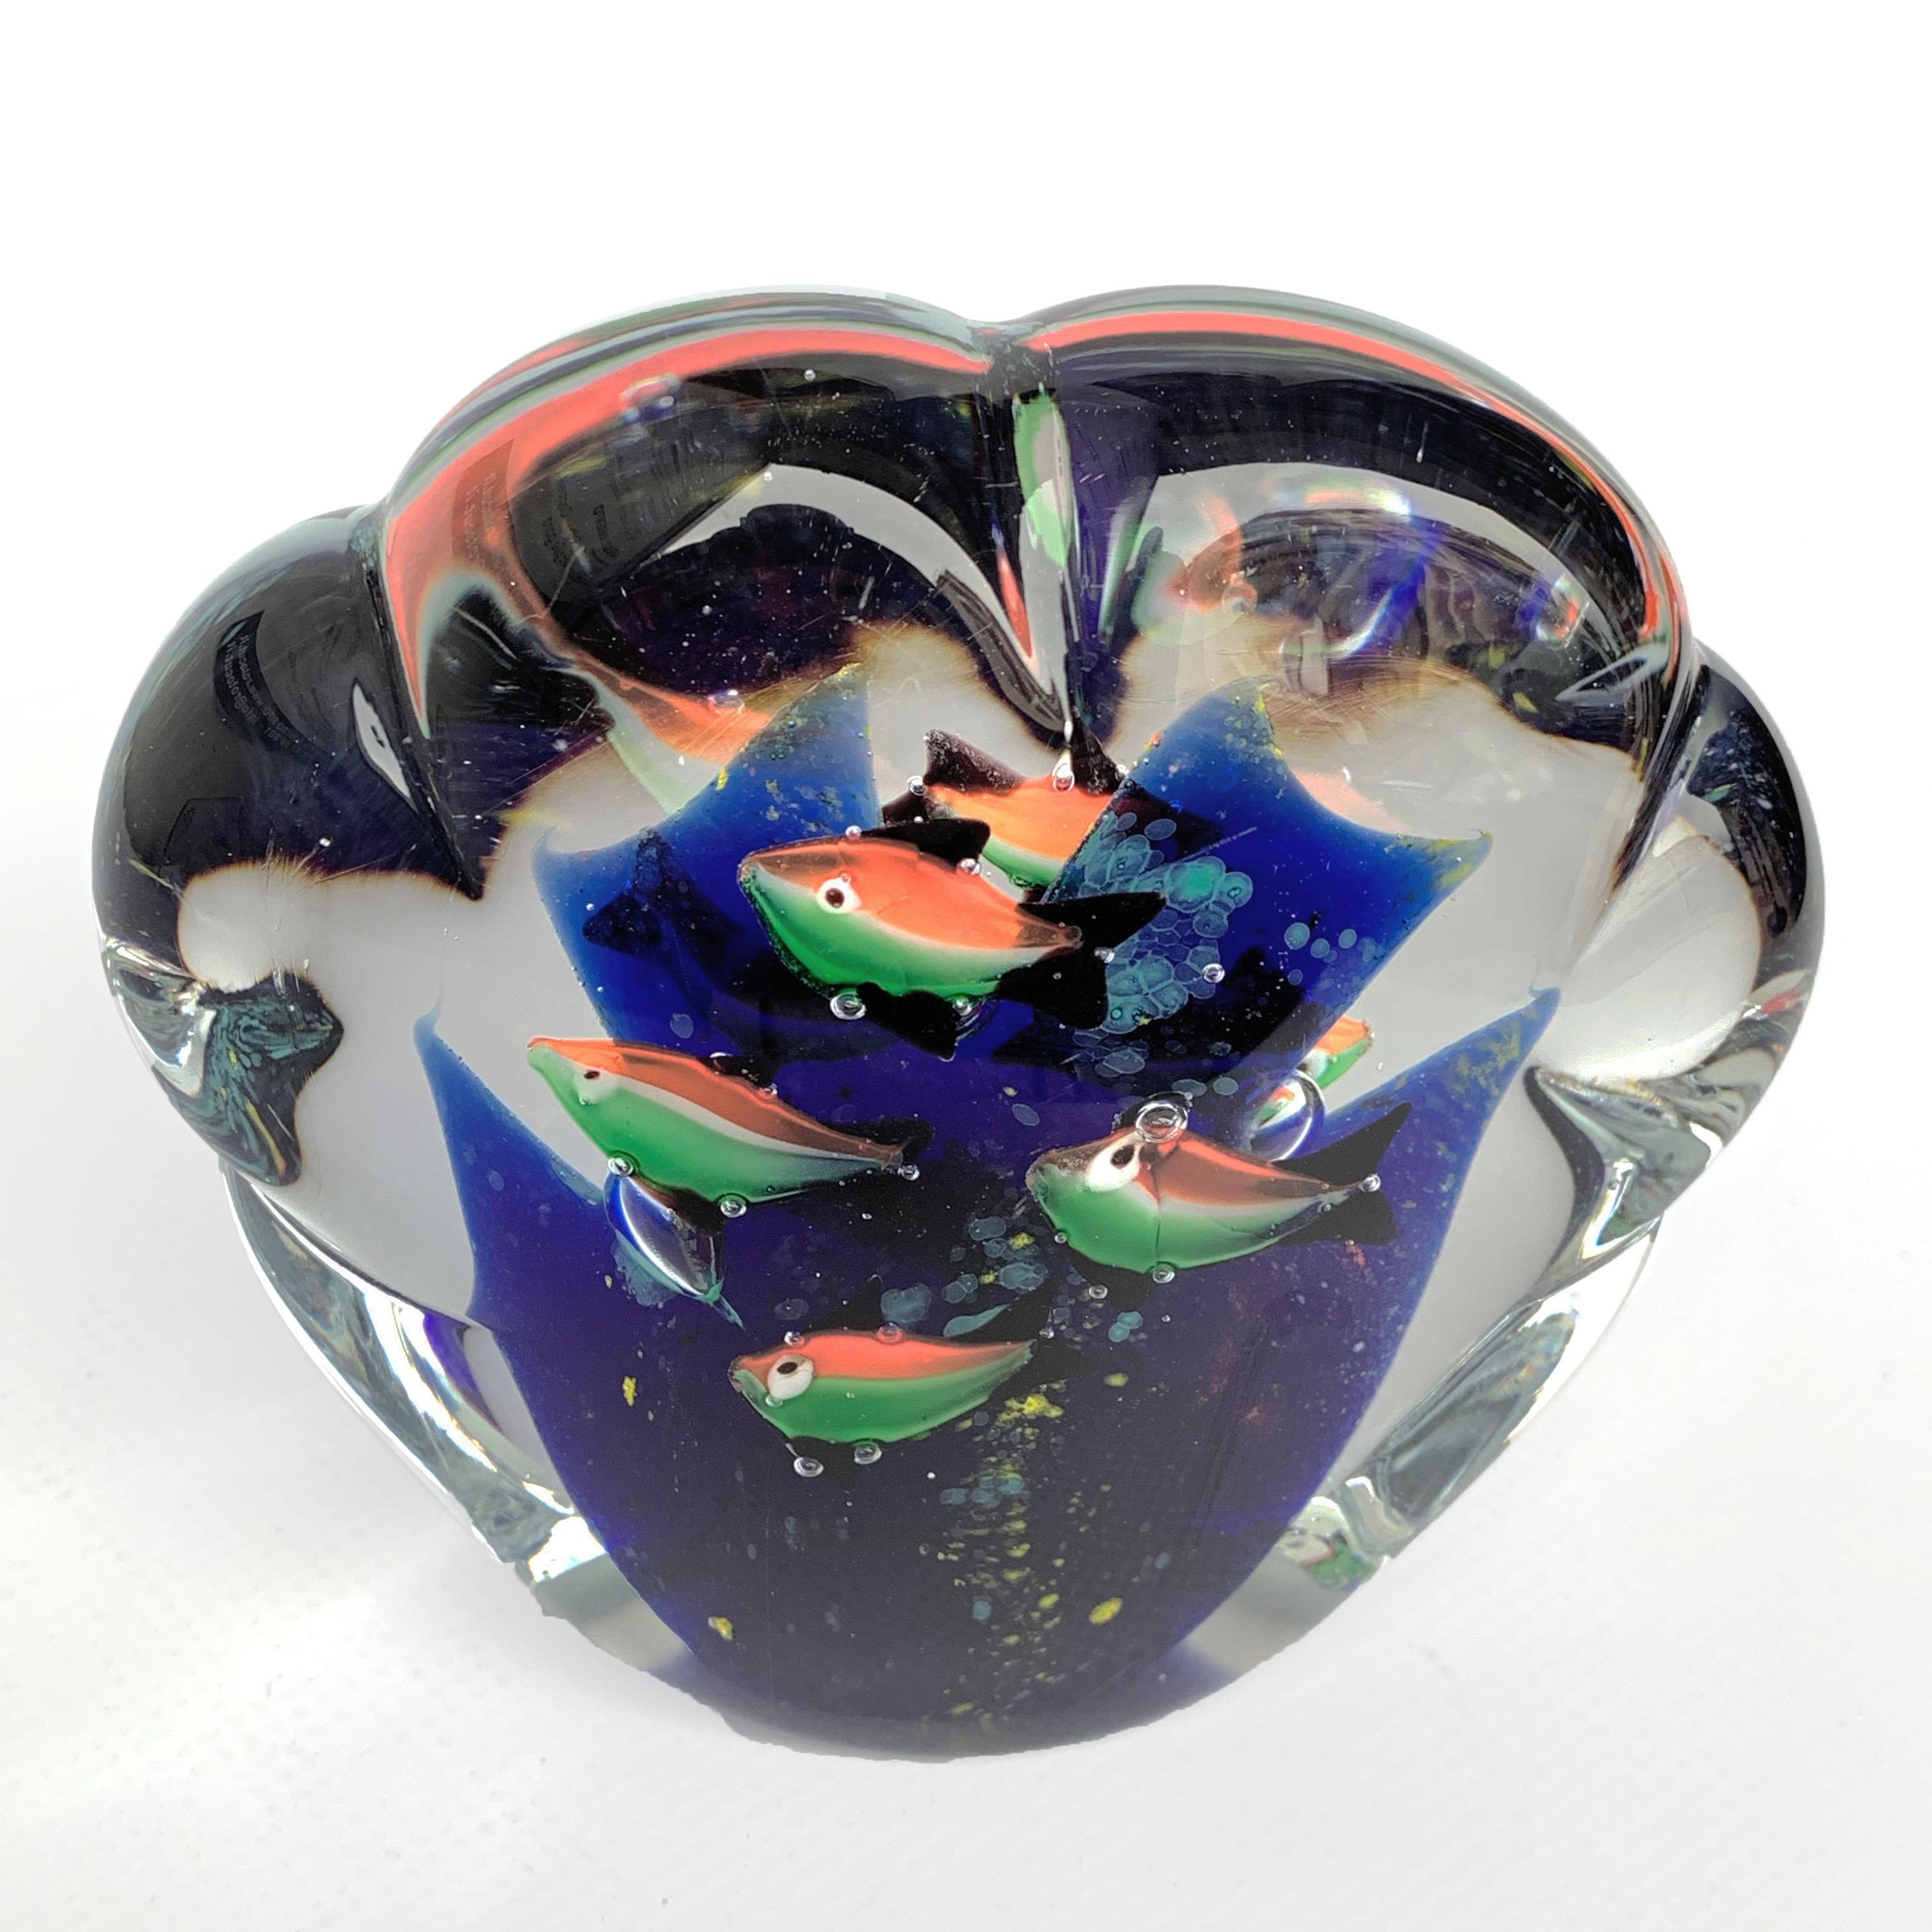 Paperweight Sculpture for Aquarium in White, Blue, Red and Green Murano Glass 1